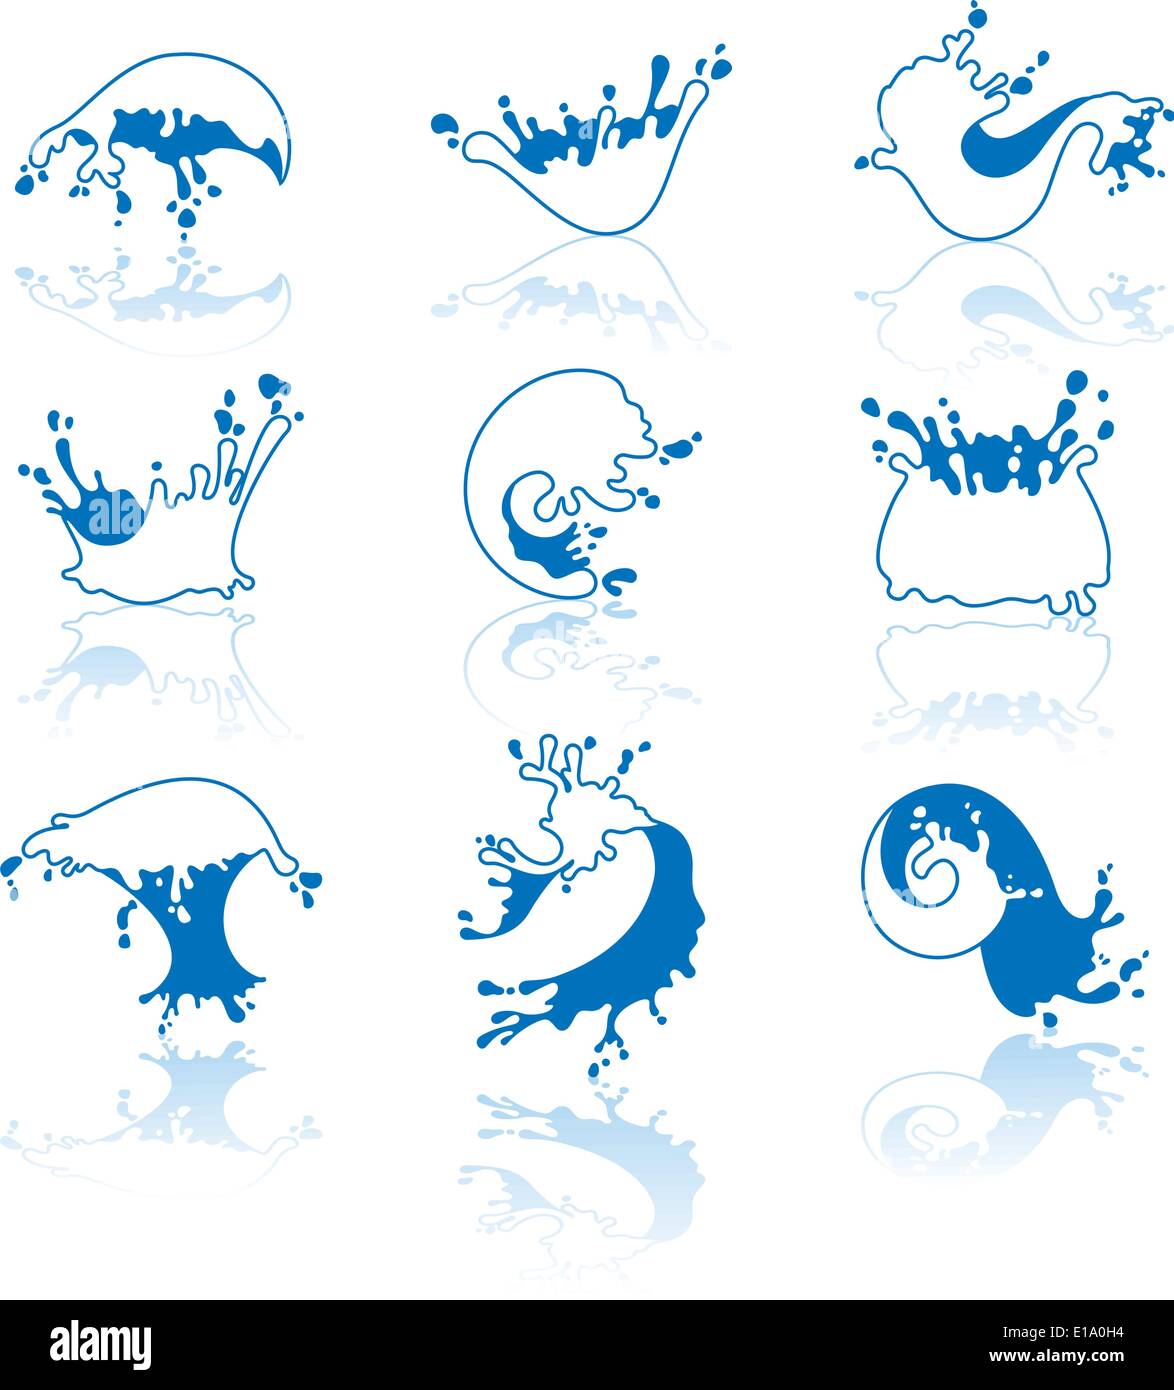 Splashing Waves & Water with reflection Stock Vector